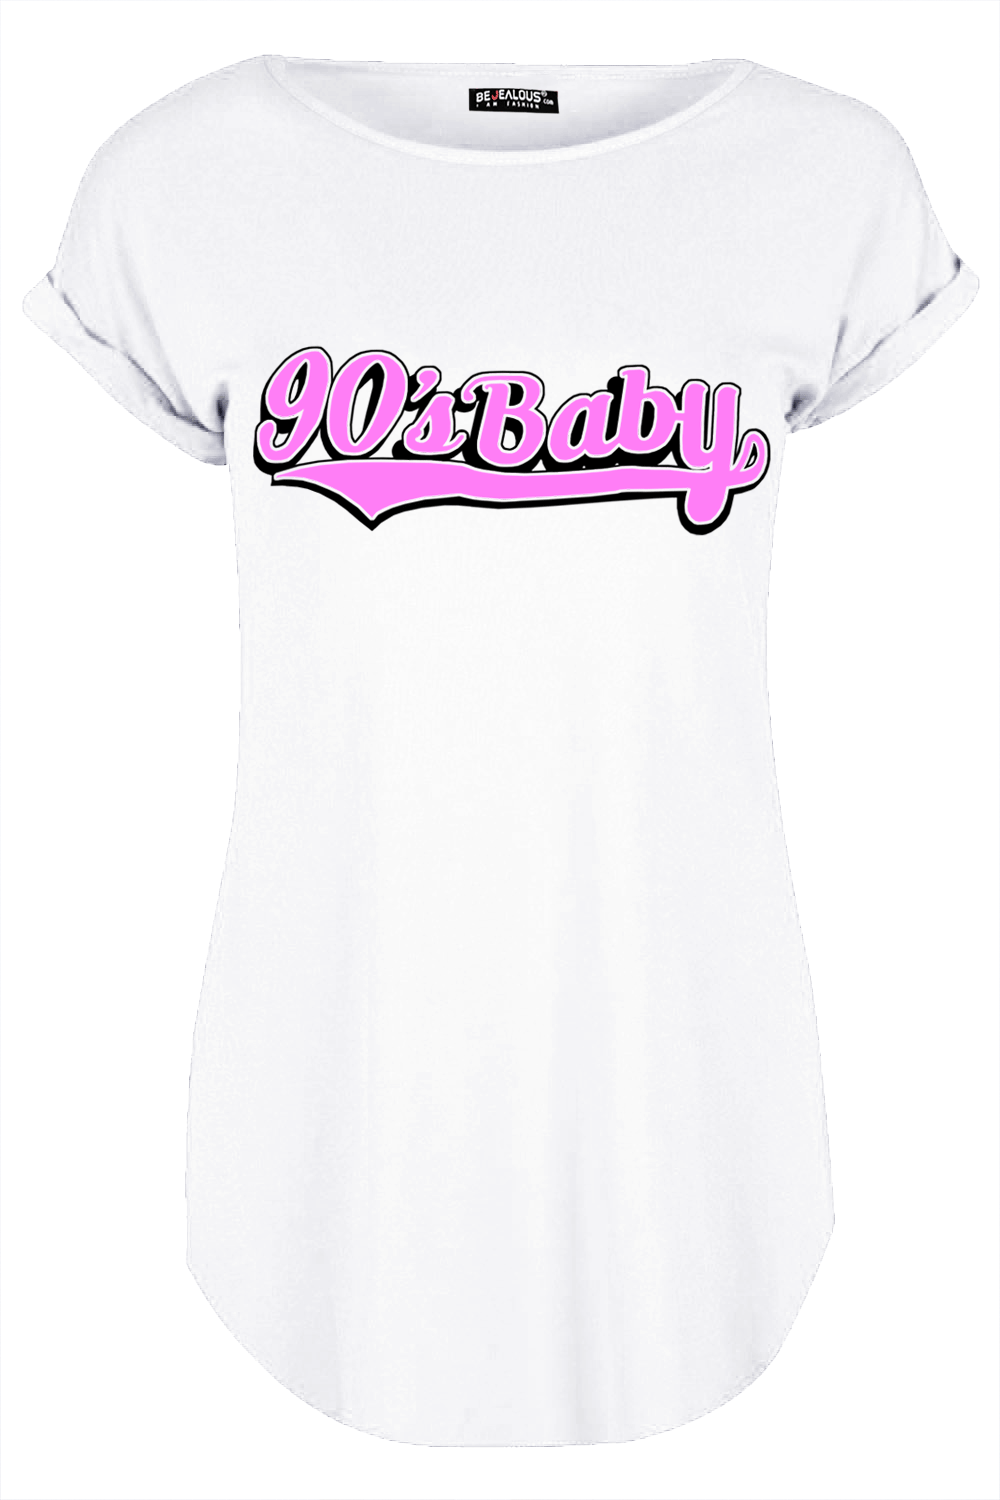 Lily 90s Baby Printed Curved Hem Turn Up T Shirt